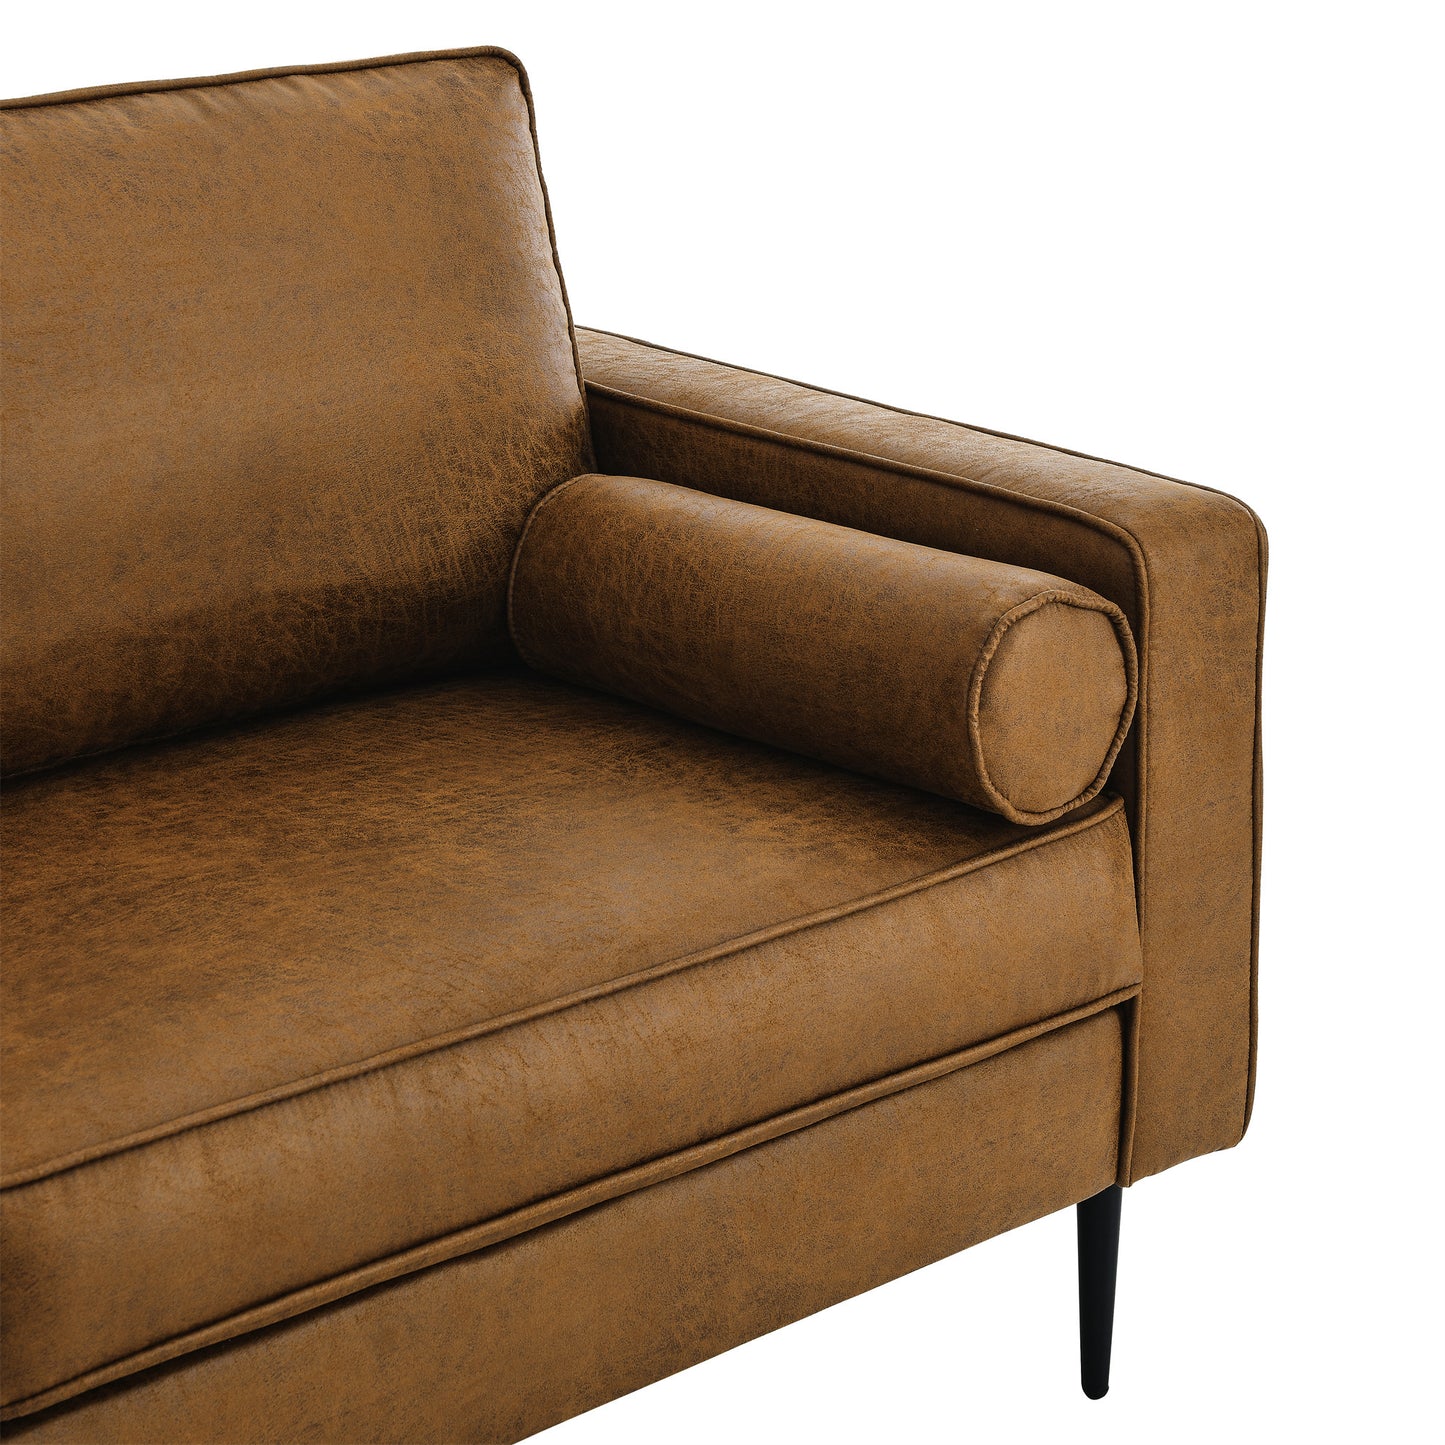 79" Mid-Century Modern Sofa Couch with Performance Fabric -Brown